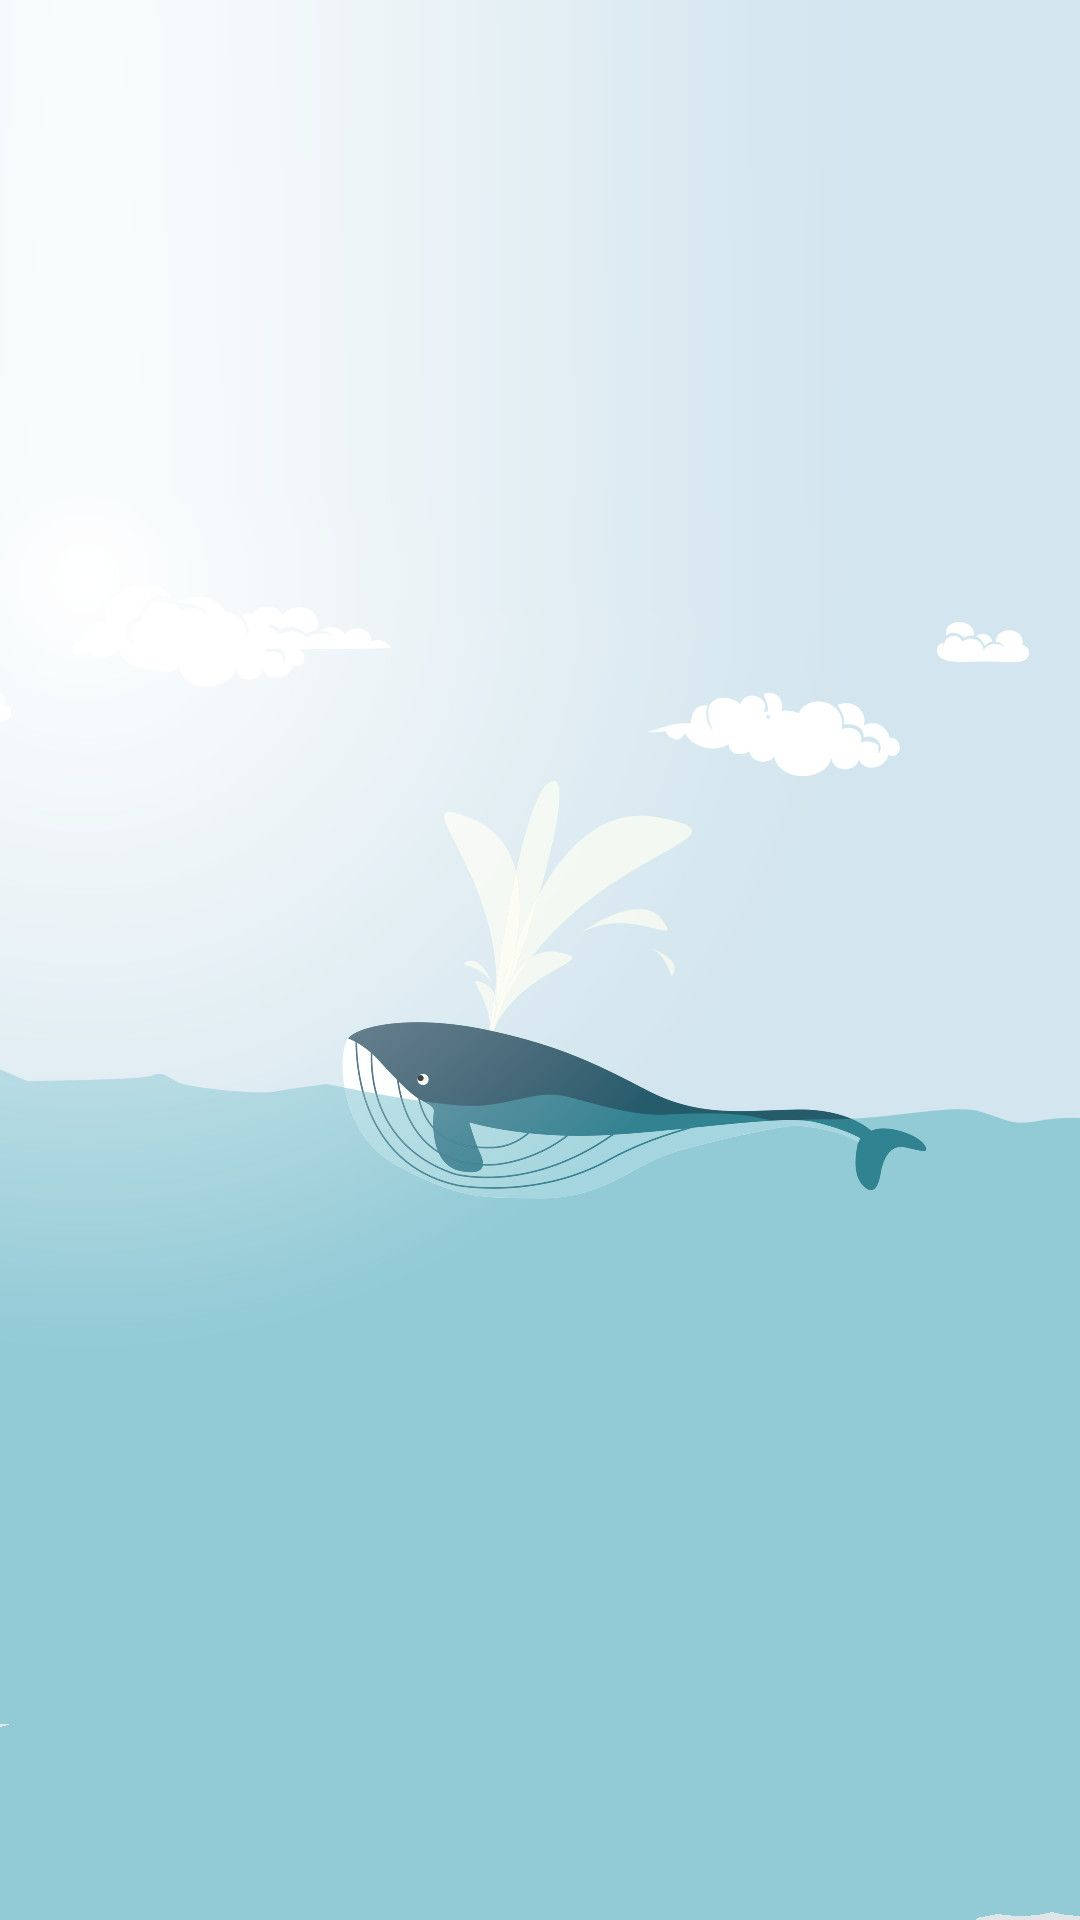 Blue whale wallpaper by MagentaPaul3435 - Download on ZEDGE™ | d073